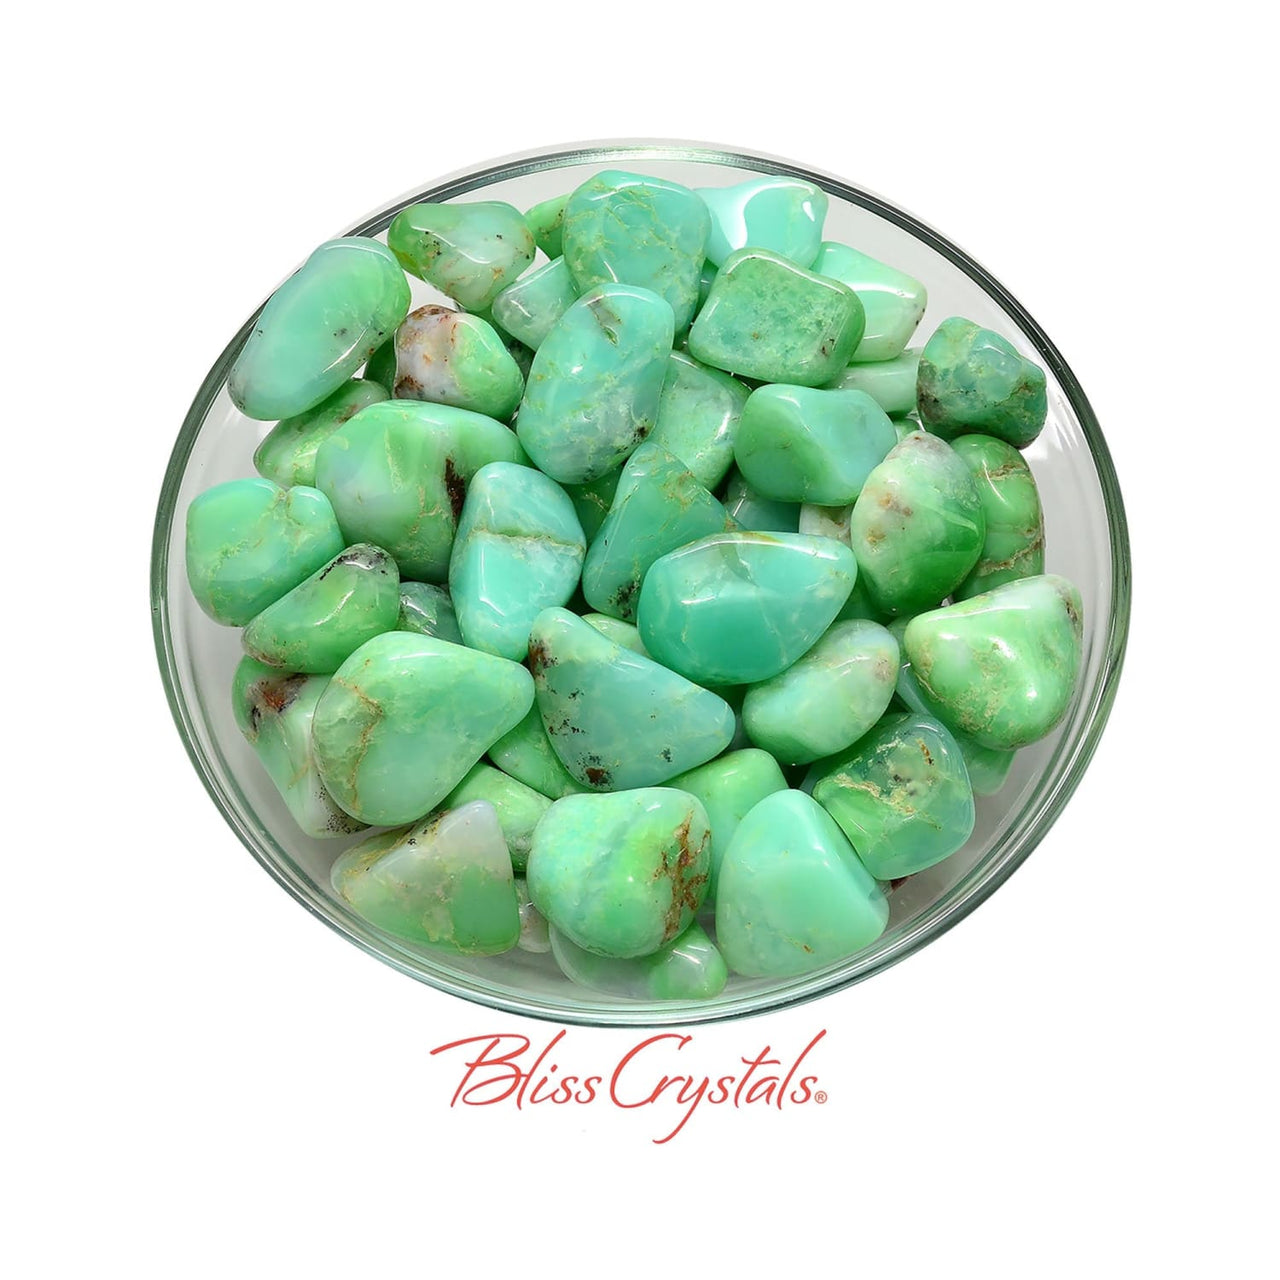 1 CHRYSOPRASE Tumbled Stone Healing Crystal and Stone for 